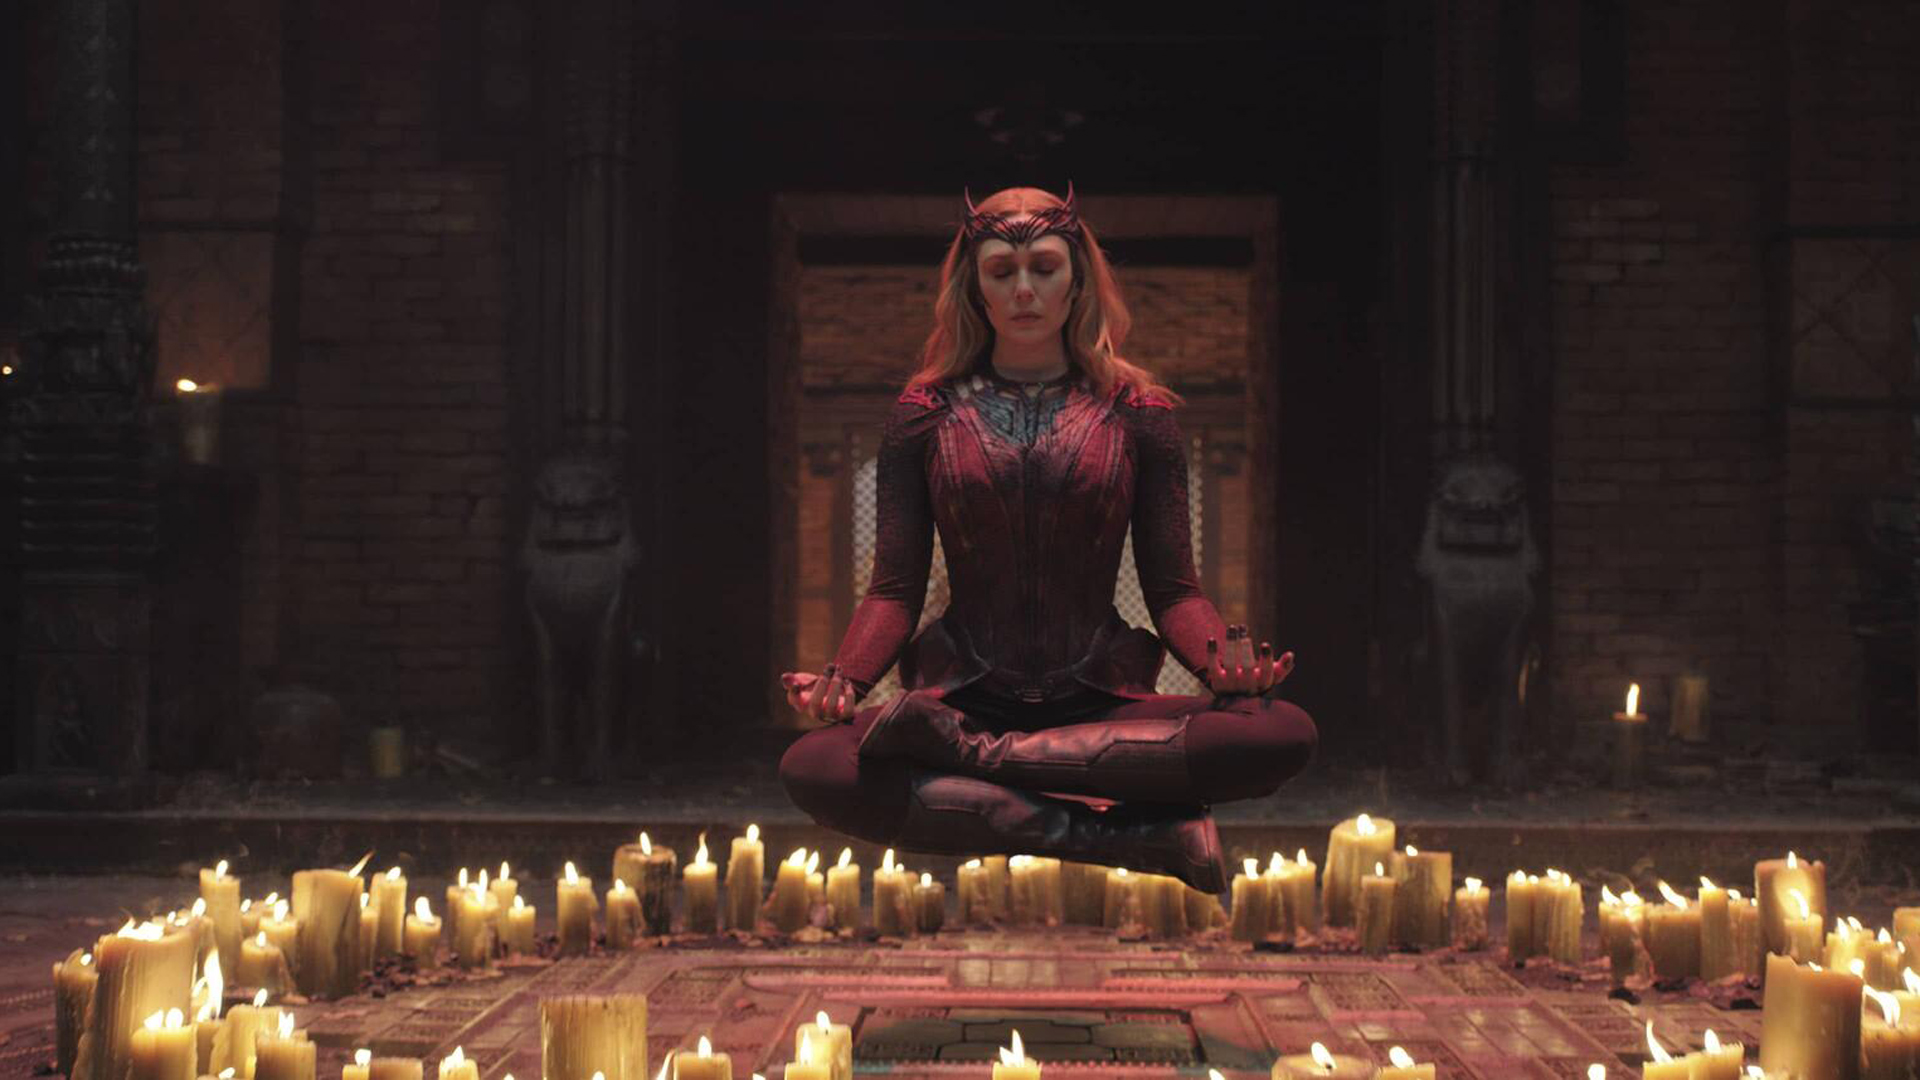 Wanda Maximoff conducts a magical session in Doctor Strange in the Multiverse of Madness